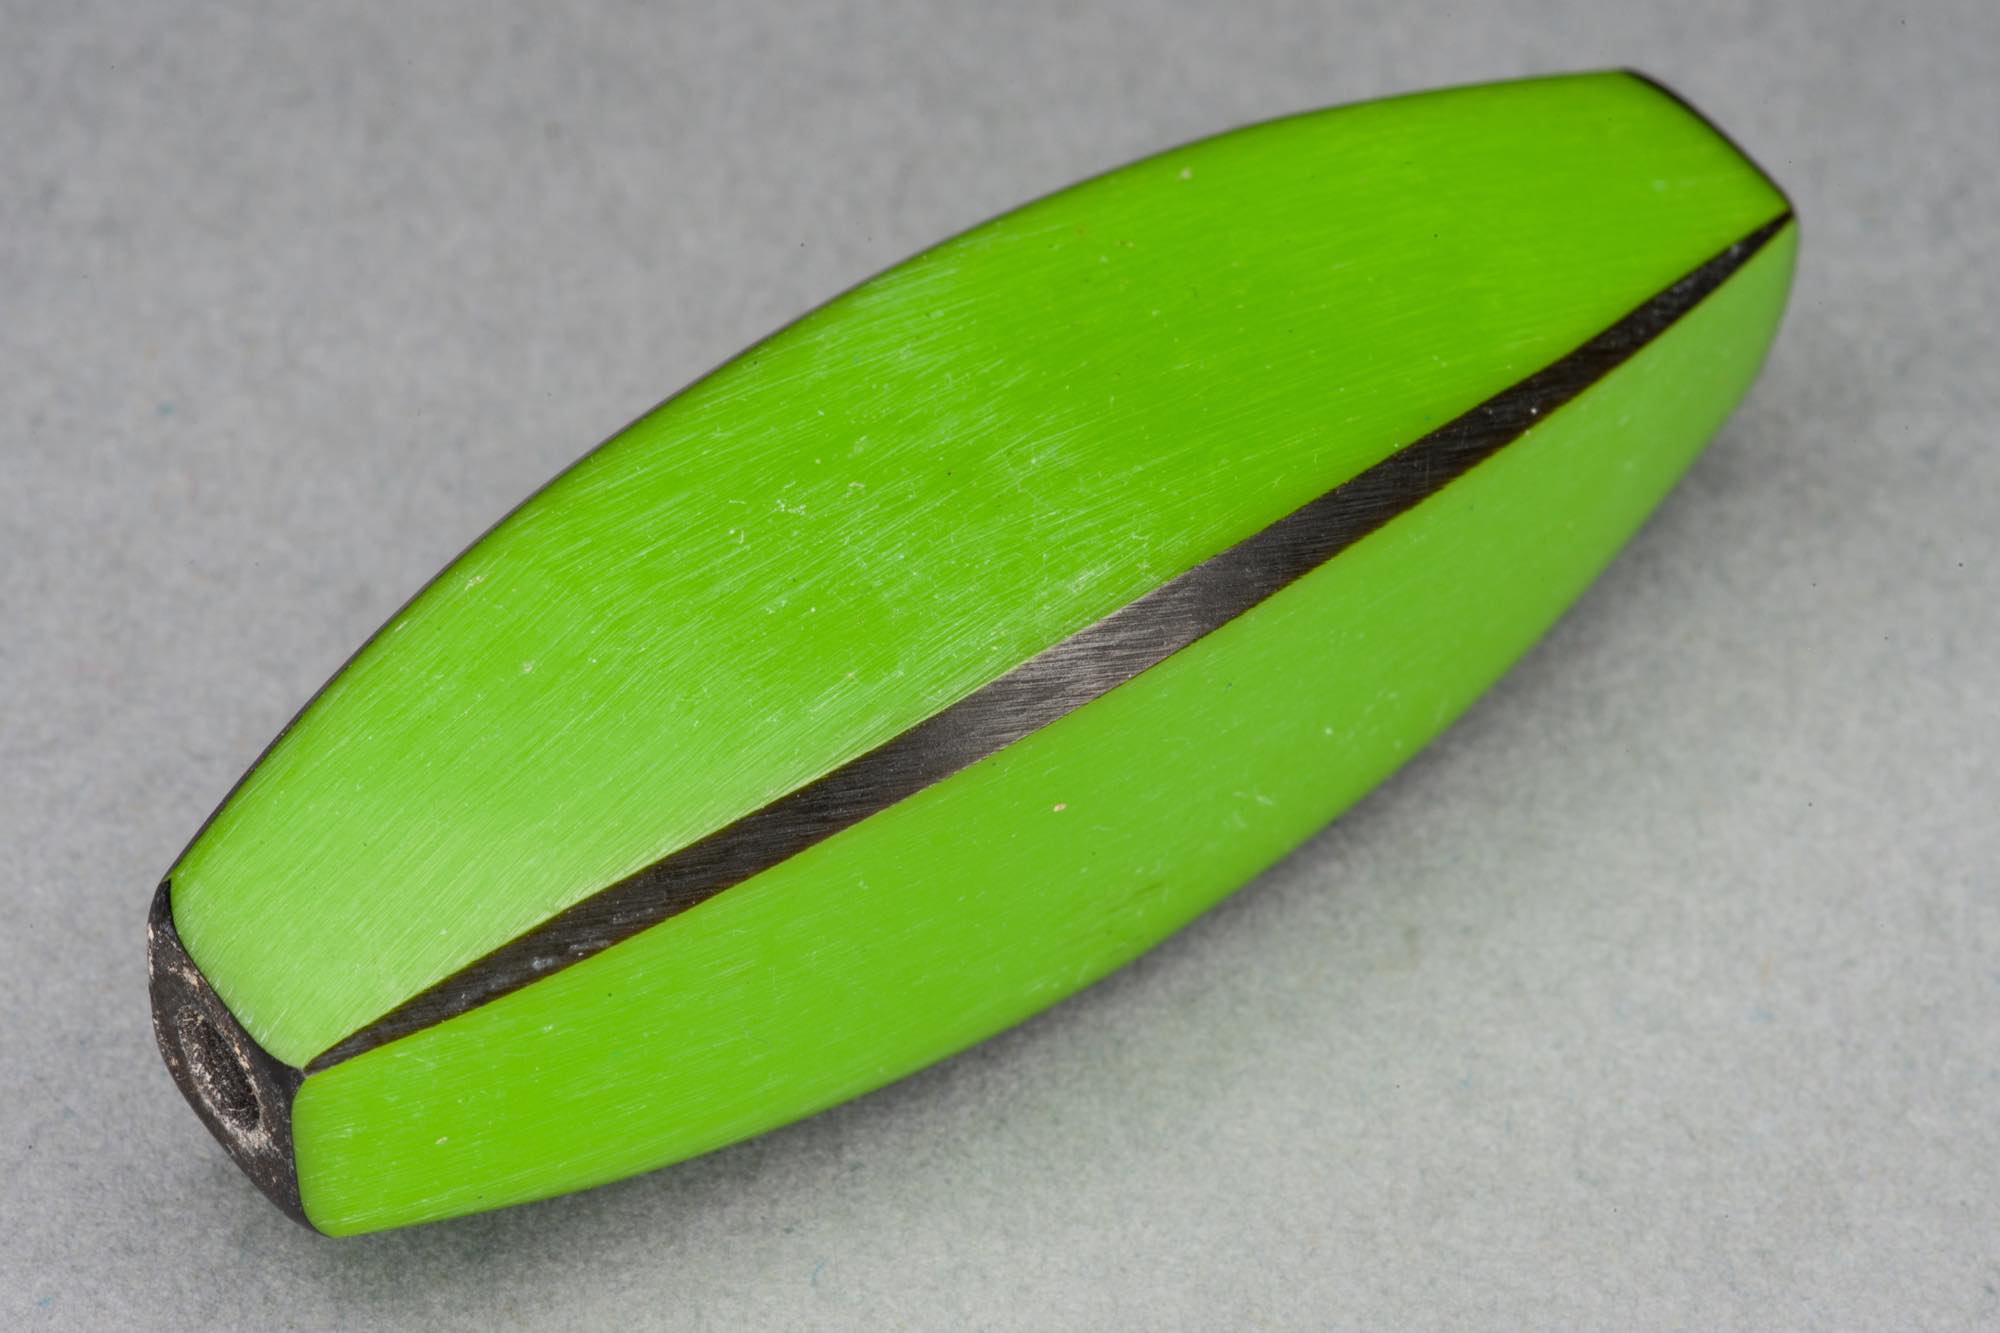 Green ‘Banana’ Resin Bead With Edge Detailing, 45x14mm, 2mm hole